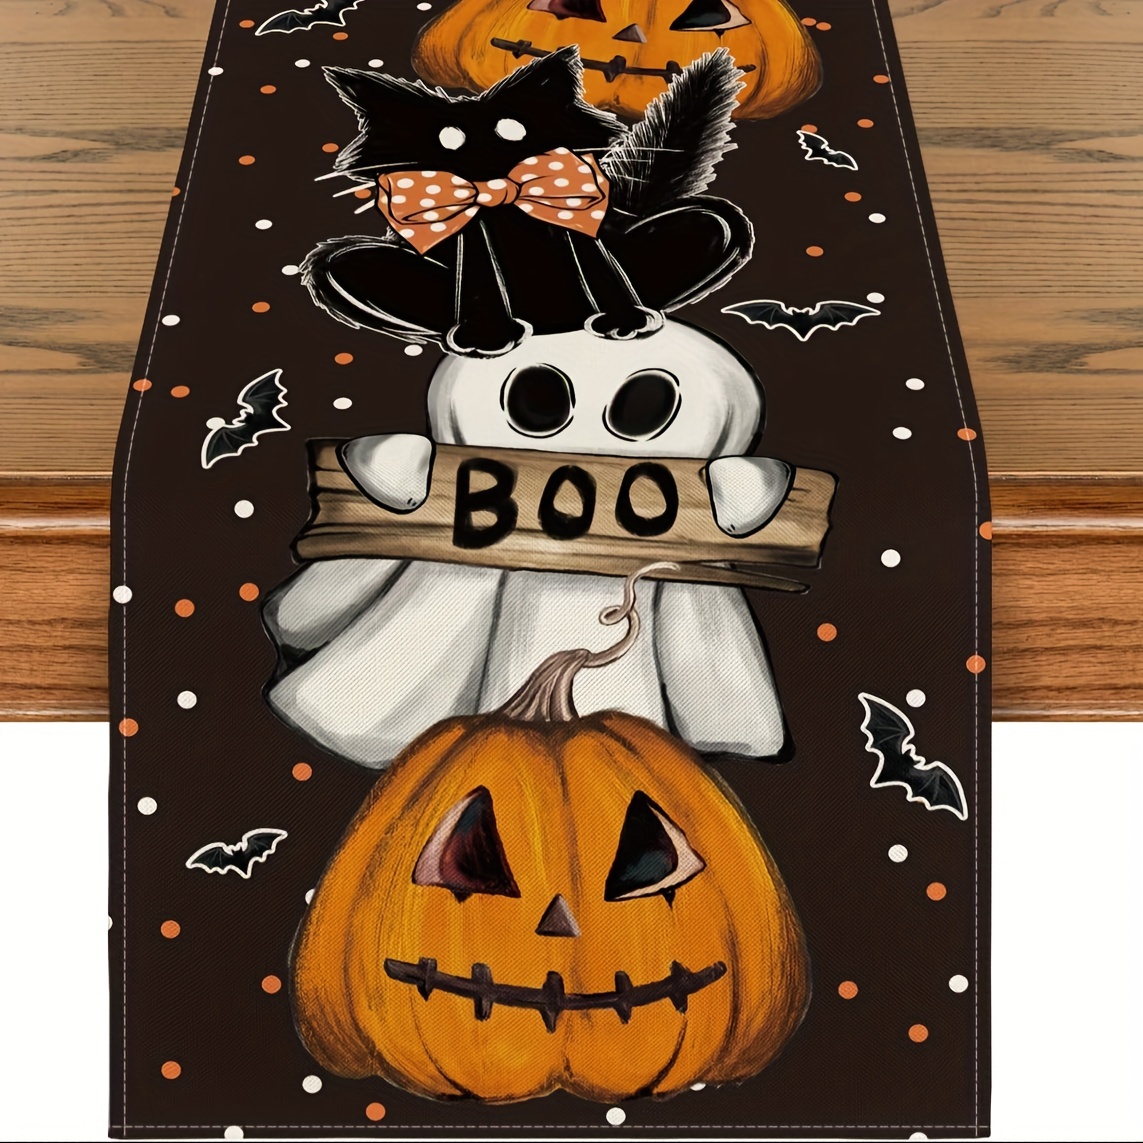 

1pc Table Runner, Polka Dot Ghost Pumpkin Cat Boo Halloween Table Runner, Bat Seasonal Fall Kitchen Dining Table Decoration For Home Party Decor, 13x48/13x72/13x108/inch, Home Supplies